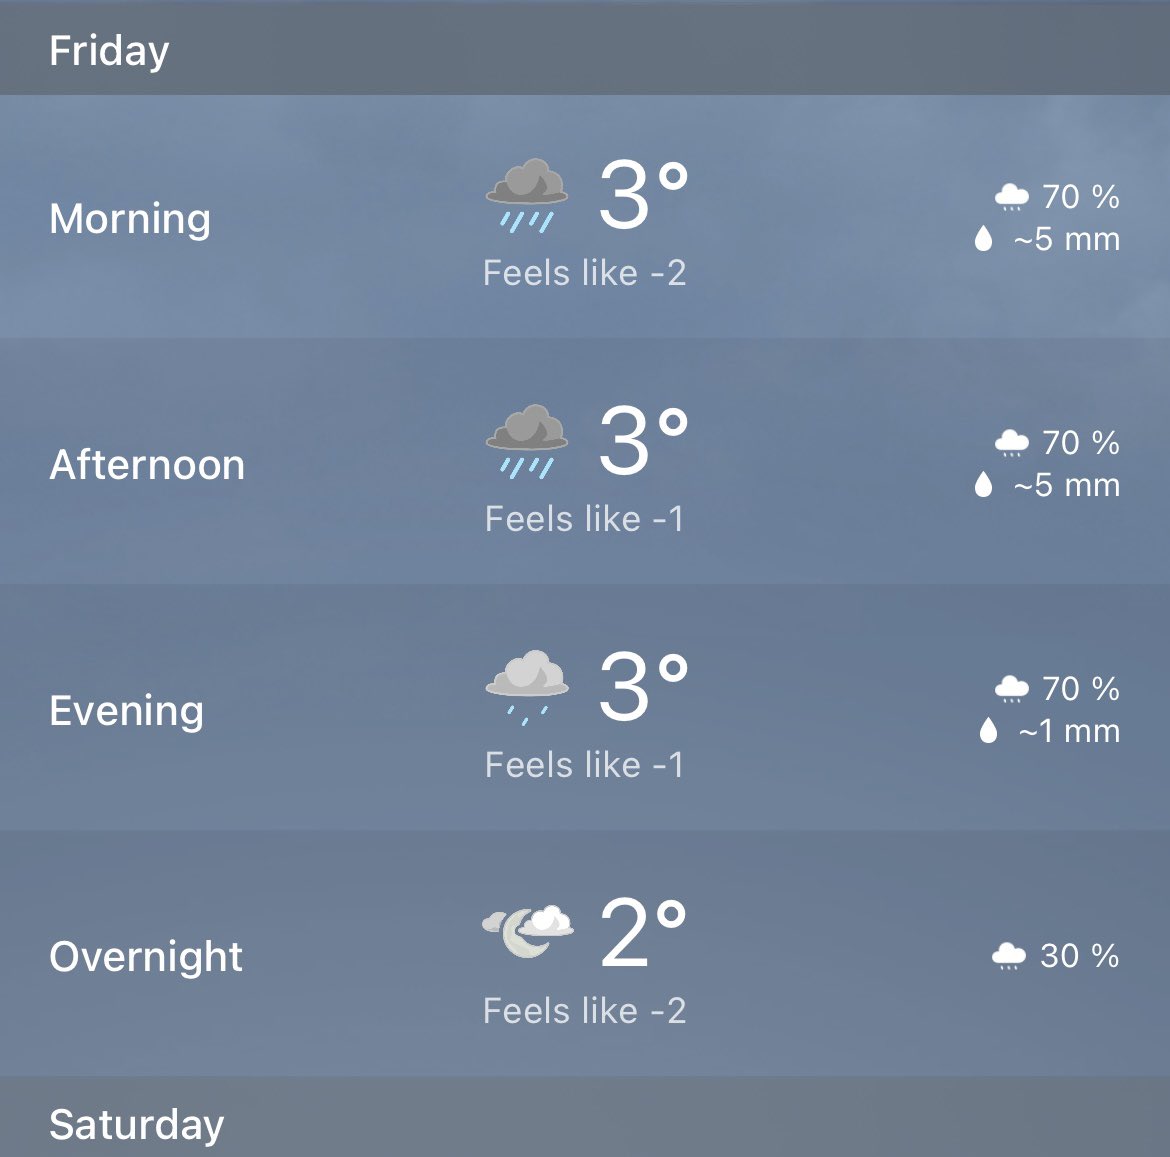 Is the Weather Network drunk or is next Friday really going to be only +3??